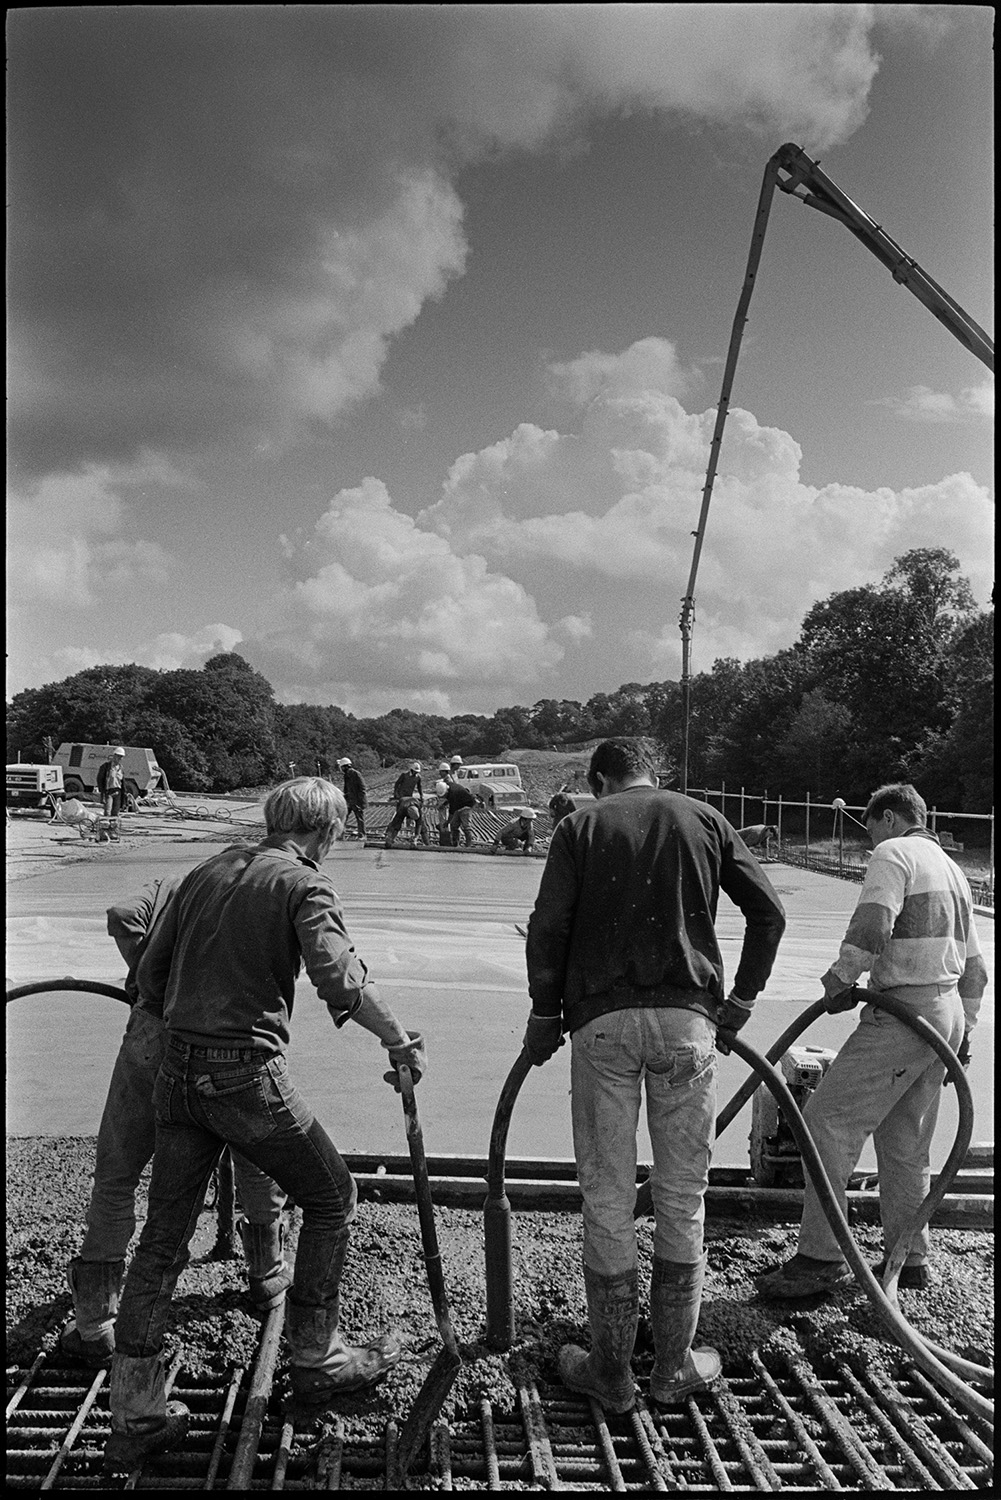 Men building new link road laying cement delivered by crane, sun and cloud. 
[Four men laying cement over metal mesh on the Devon Link Road or A361. The cement is being delivered by a crane. Other workmen can be seen in the background.]